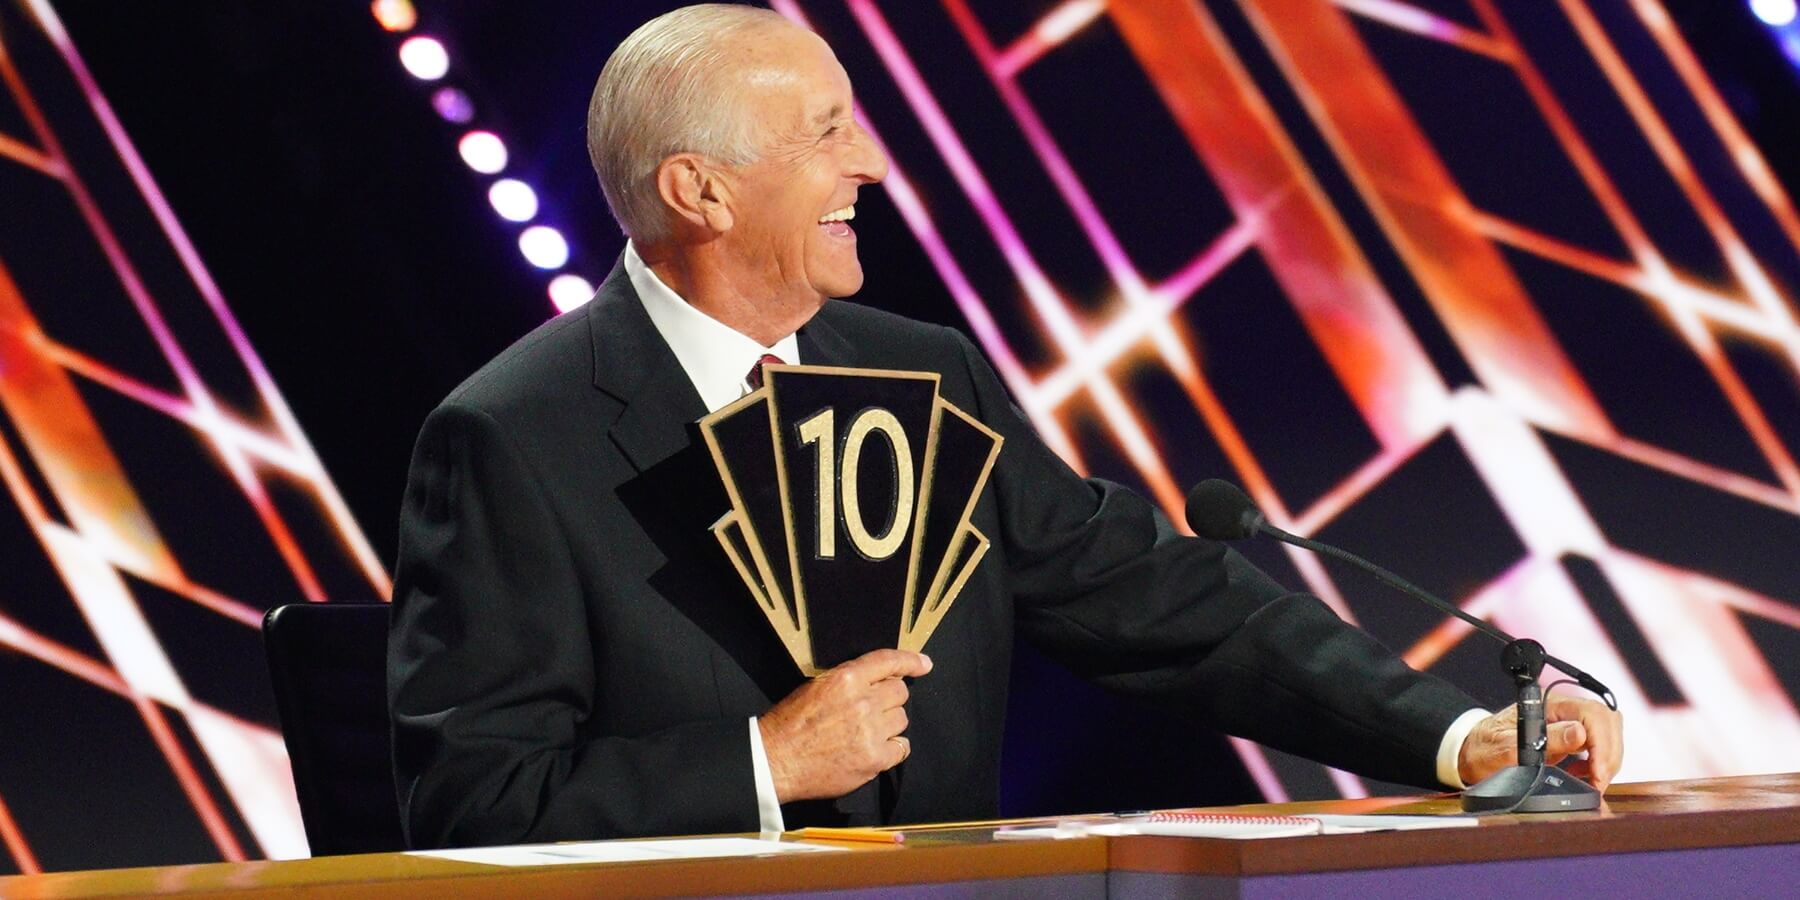 'Dancing With the Stars' late head judge Len Goodman pictured holding his iconic '10' paddle.